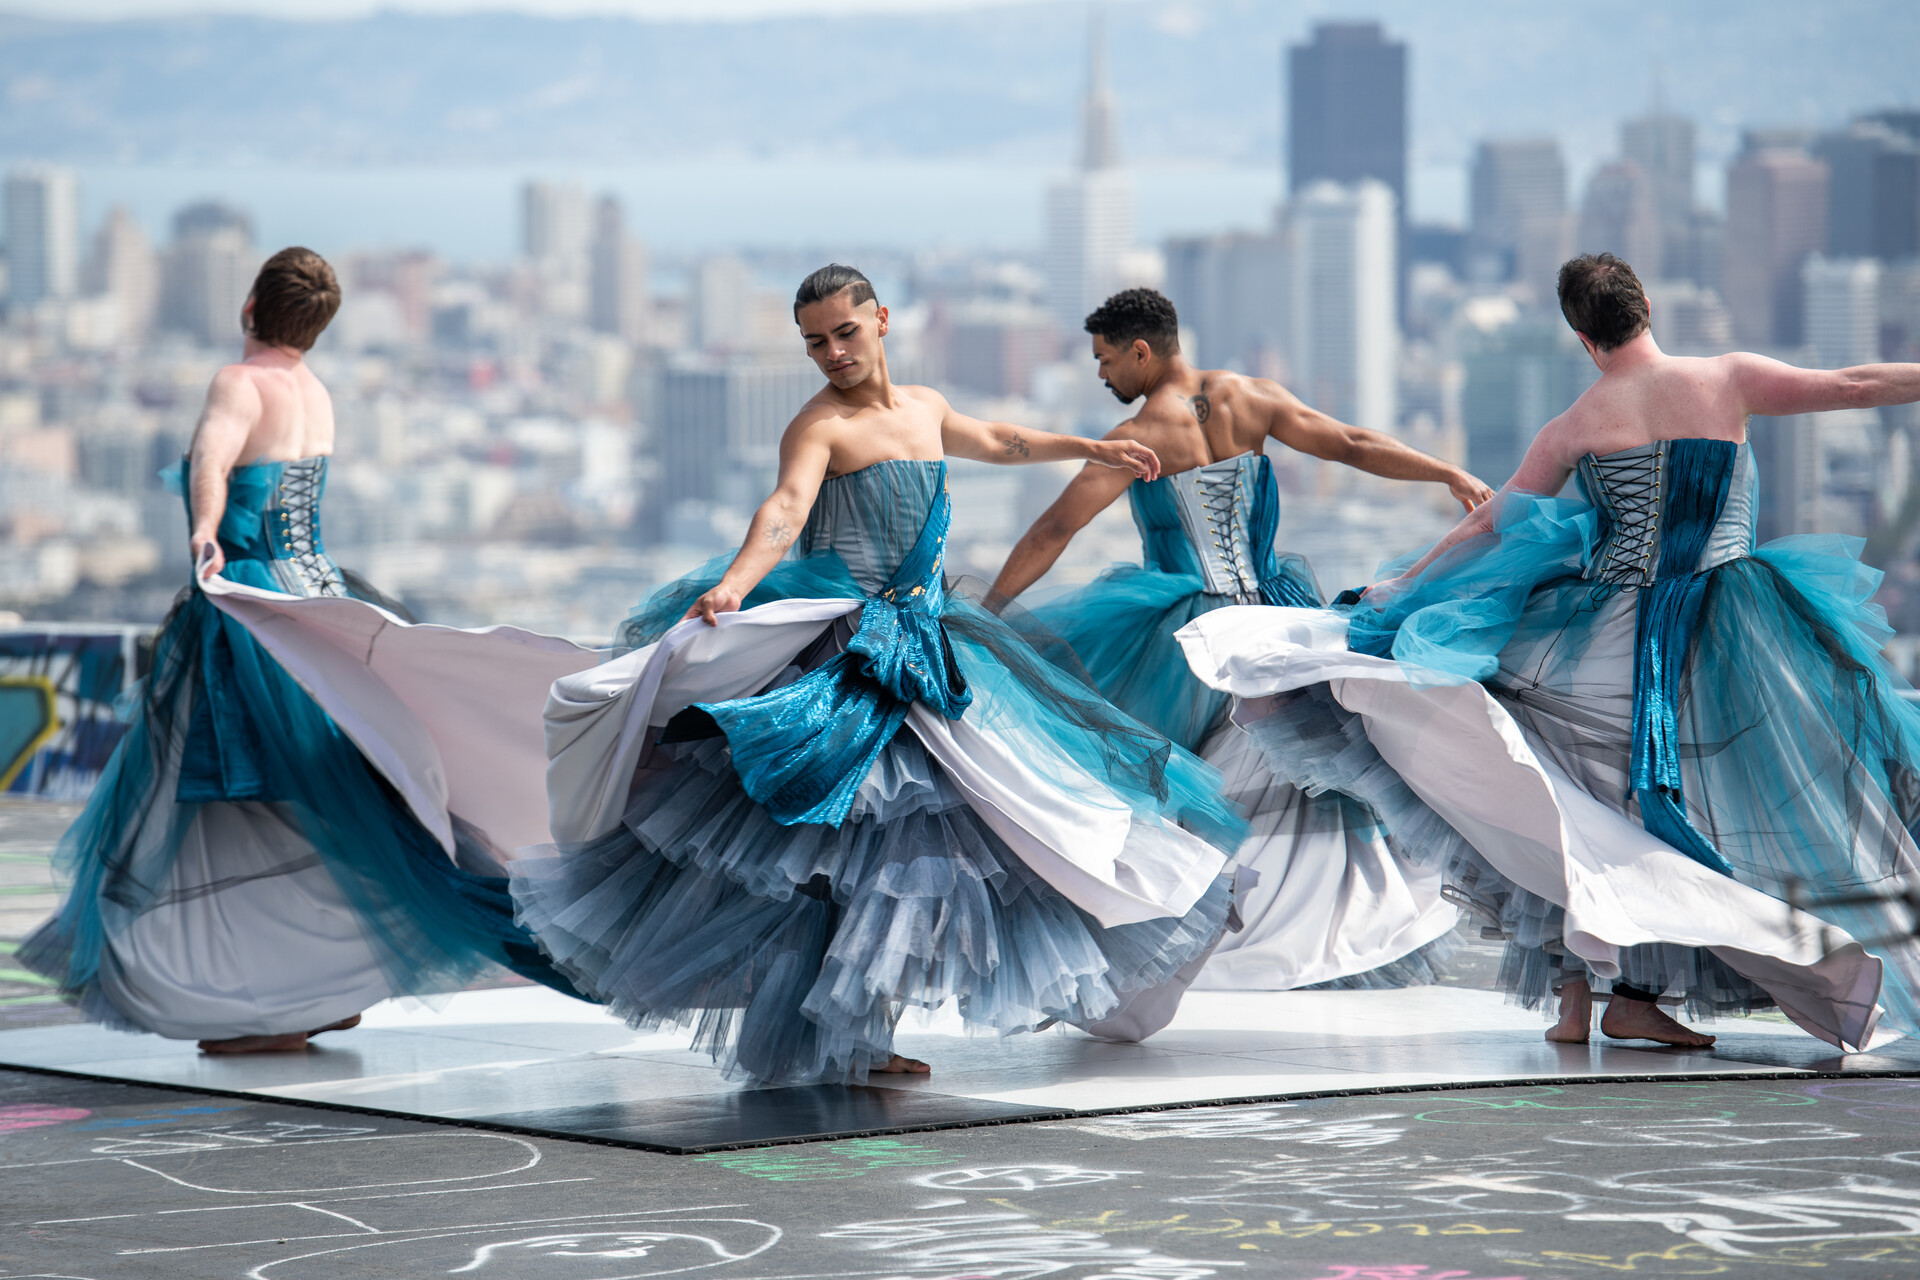 A group of dancers twirl dressed in strapless dresses that are aqua blue and white, photographed mid-twirl. Behind them is a striking view of the downtown San Francisco skyline.